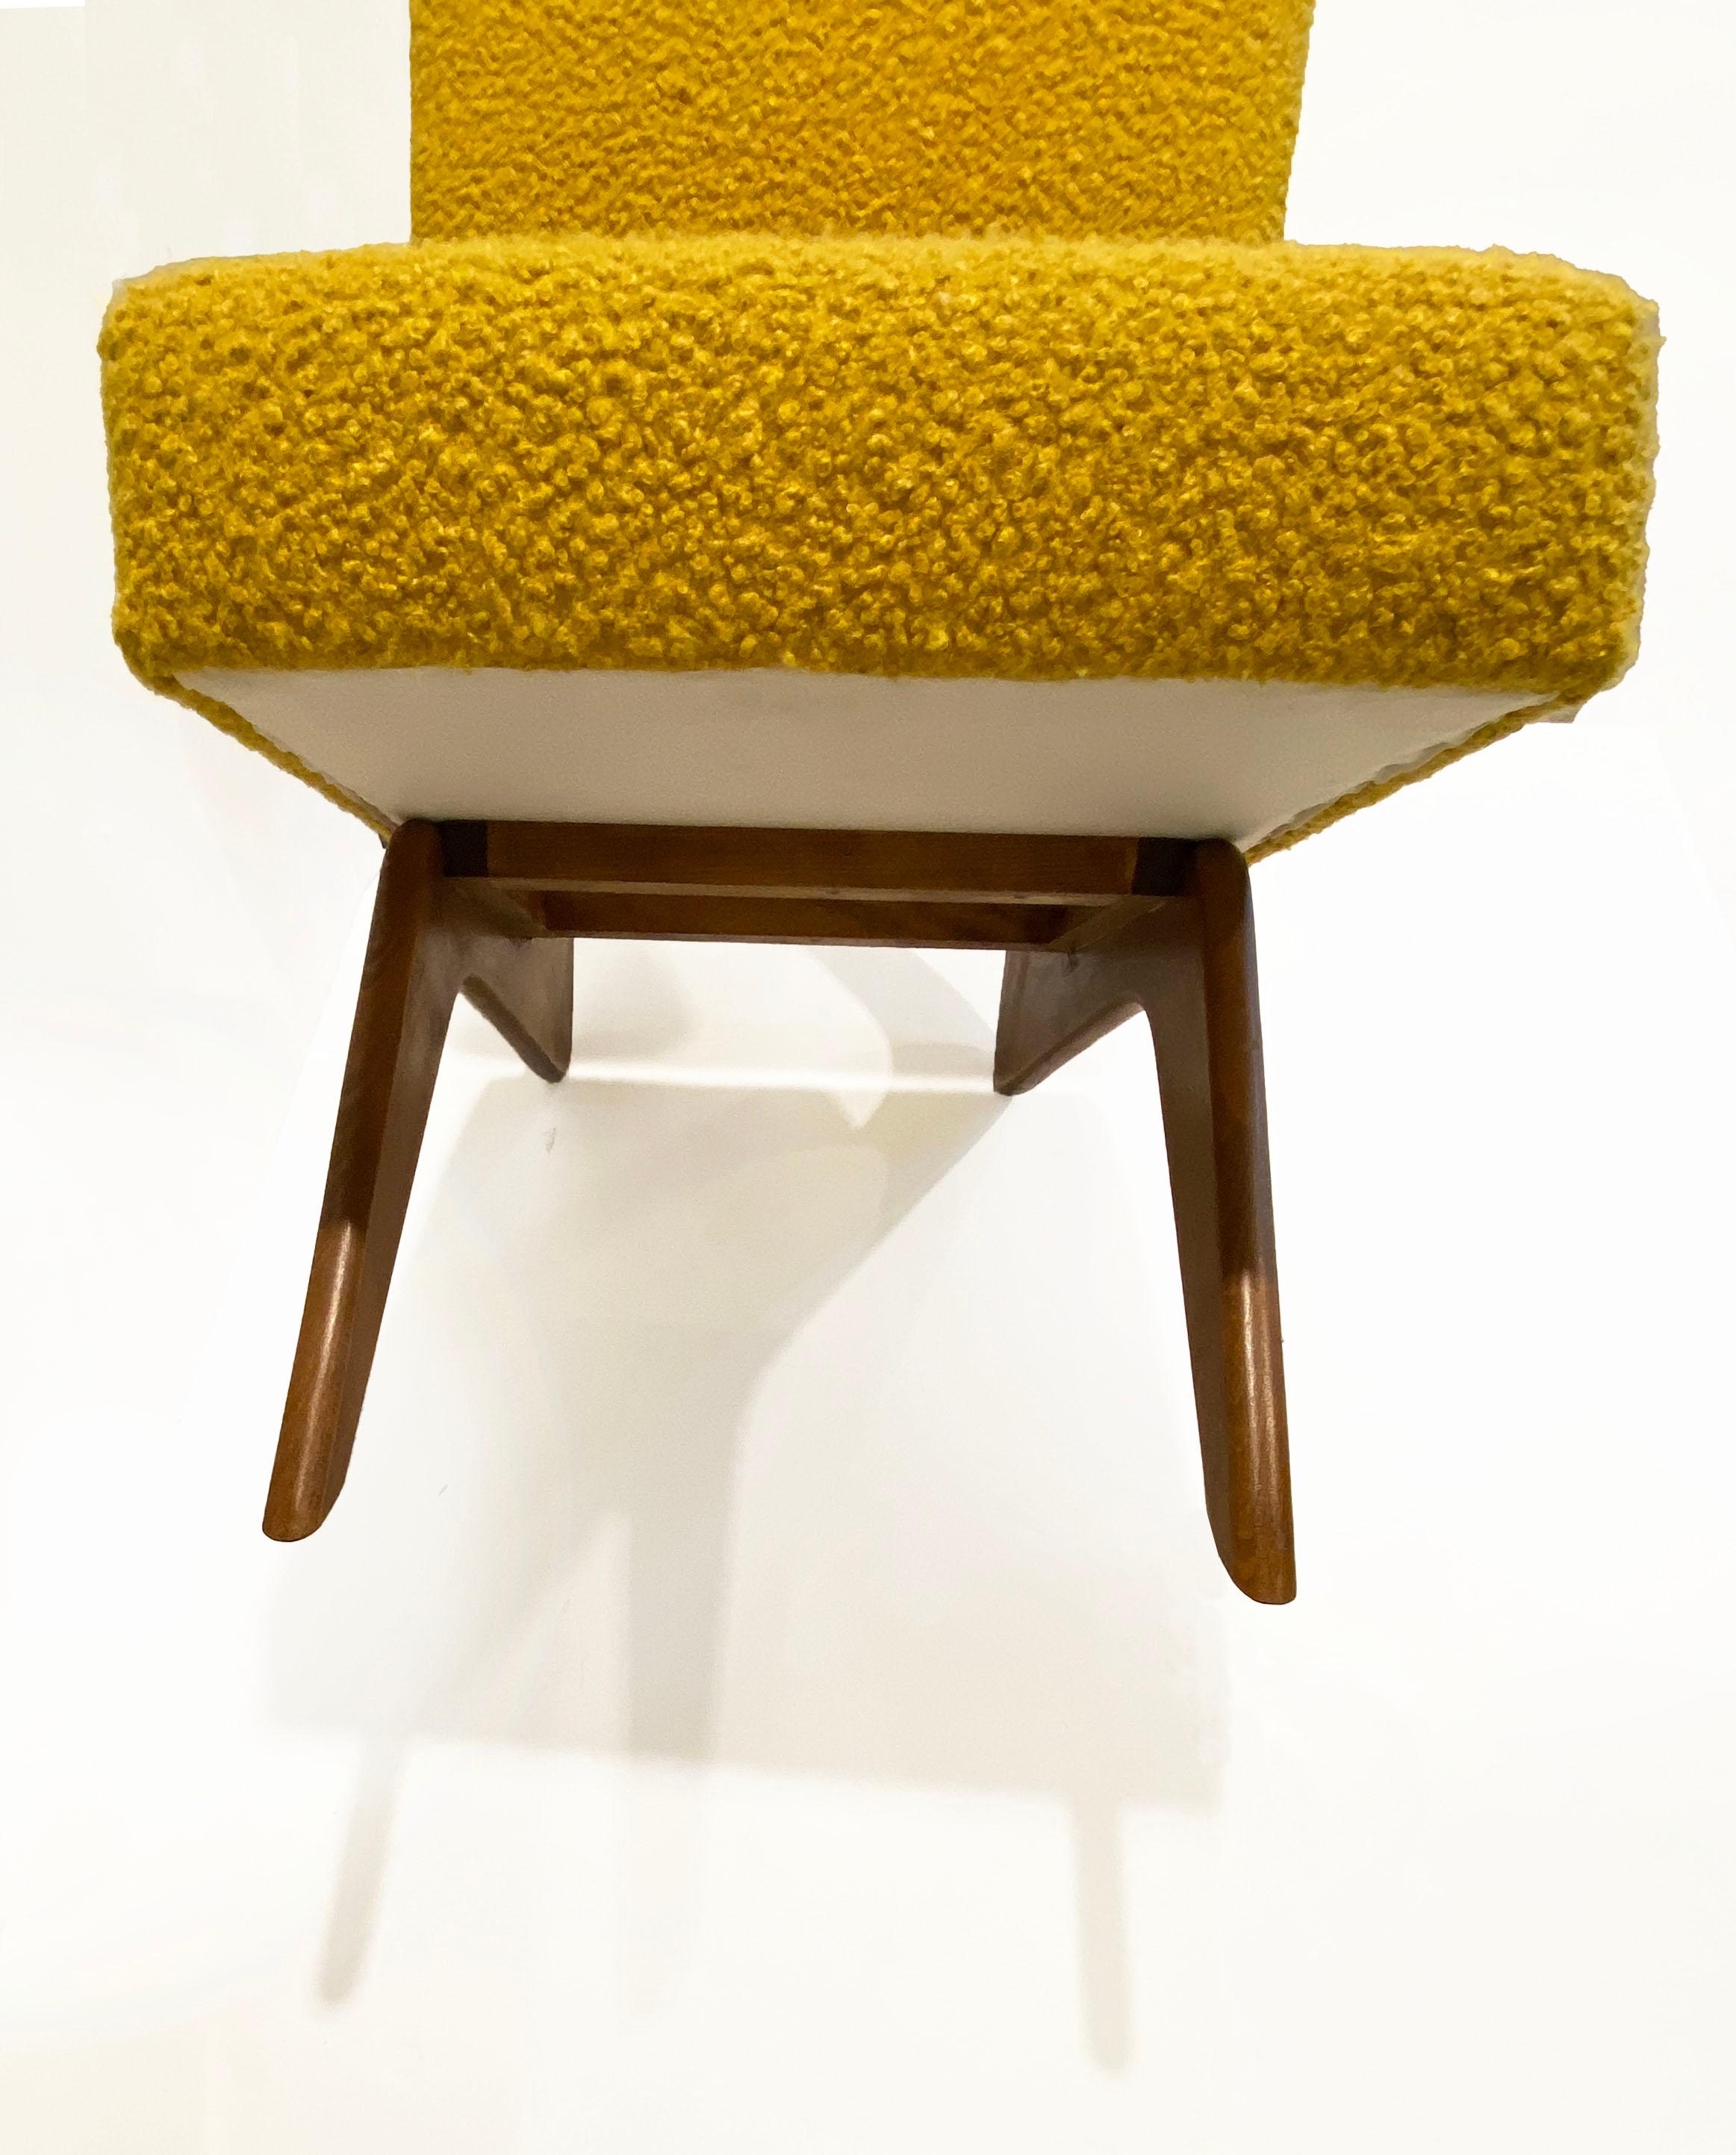 Bespoke Italian Pair of Boucle Mustard Yellow Aero Curved Beech Lounge Chairs For Sale 9